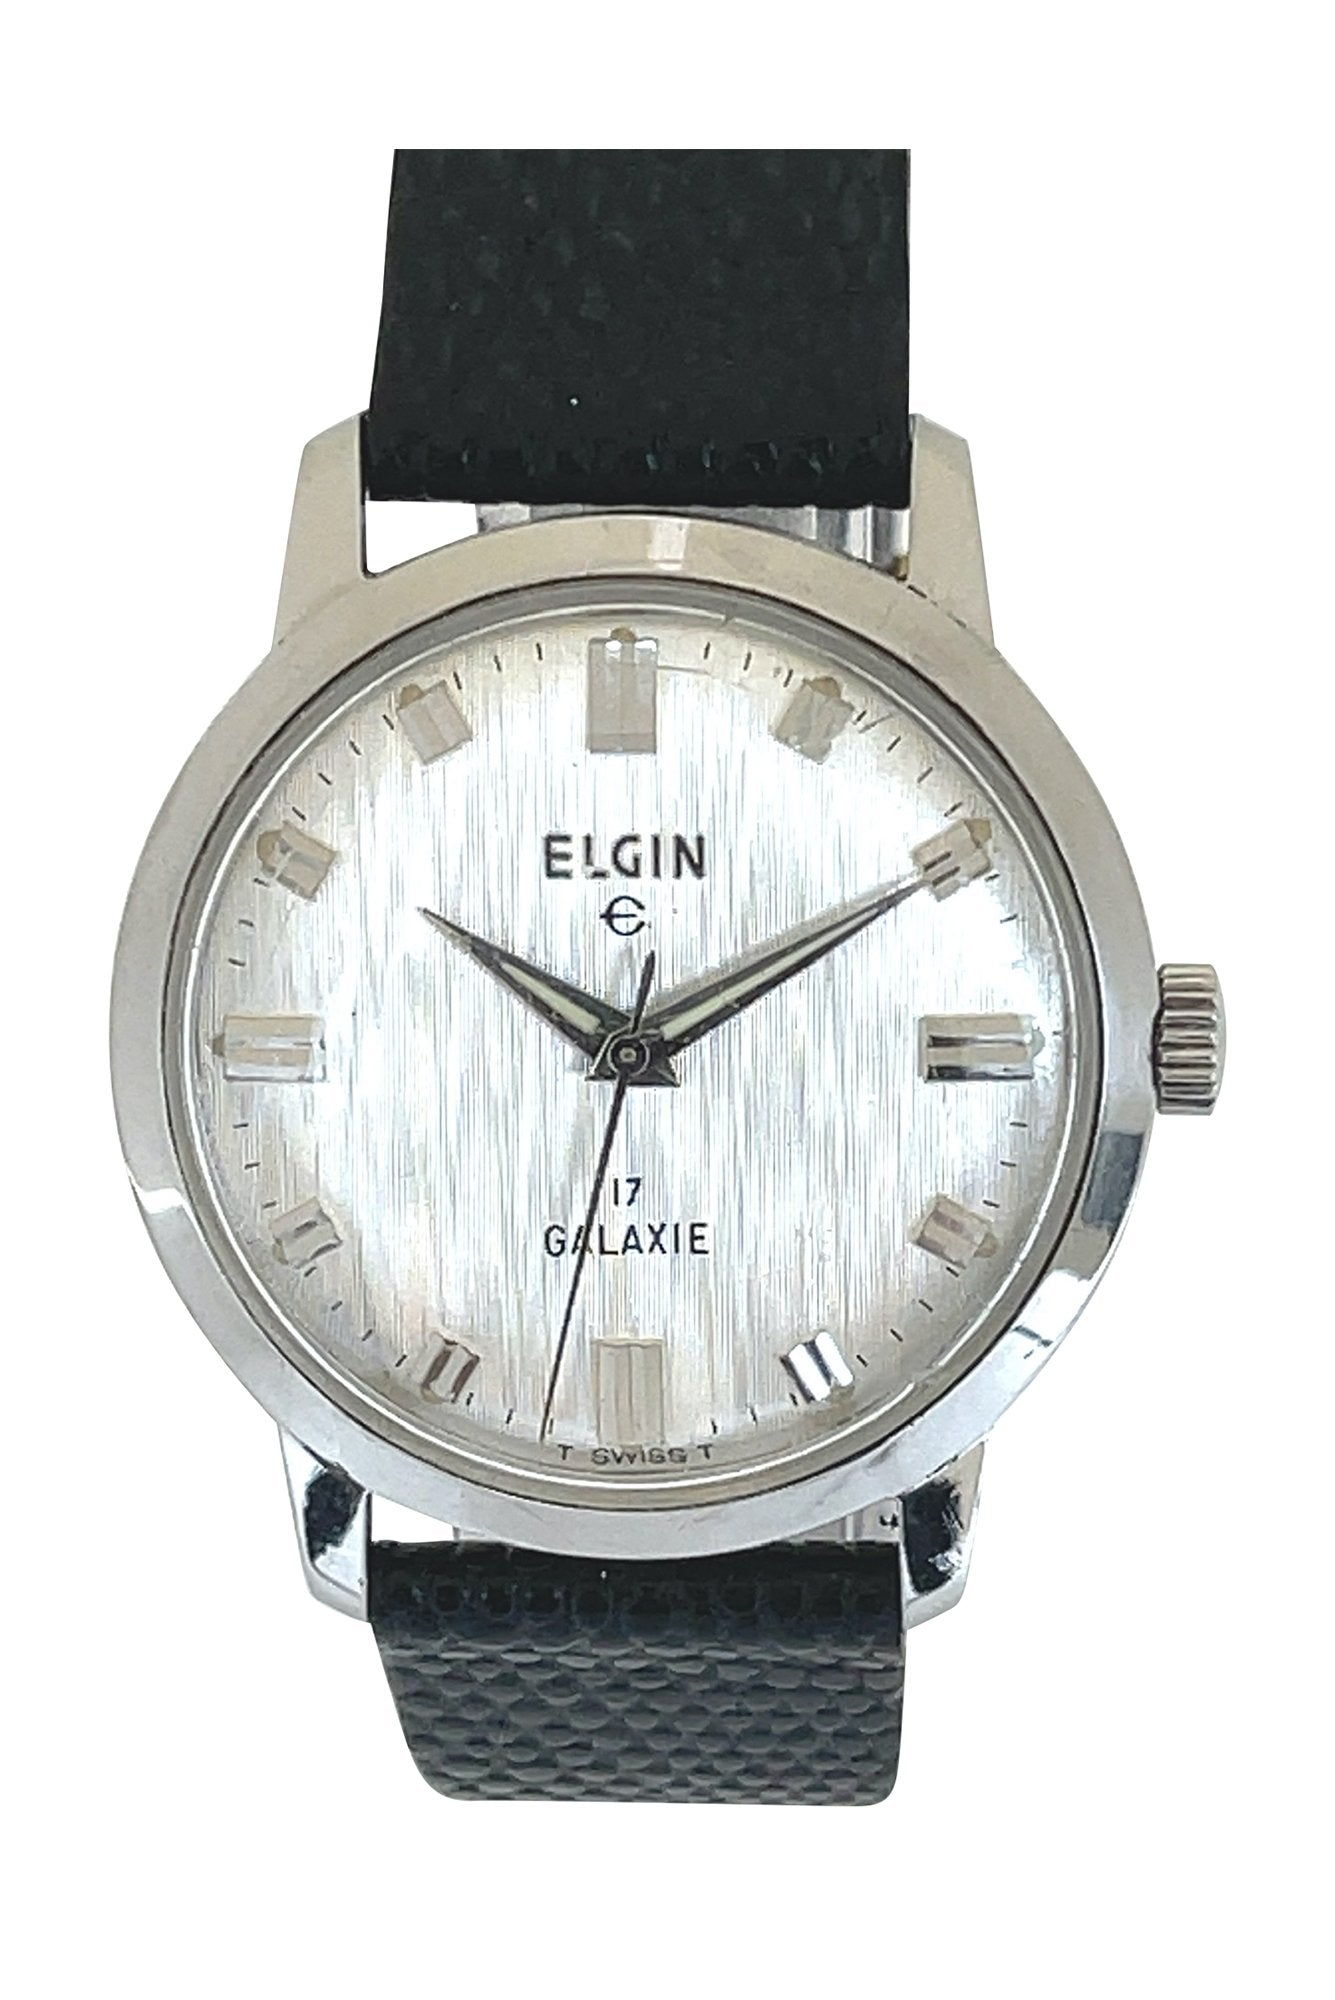 Elgin National Watch Co Galaxie - Counting Time Watch Purveyors